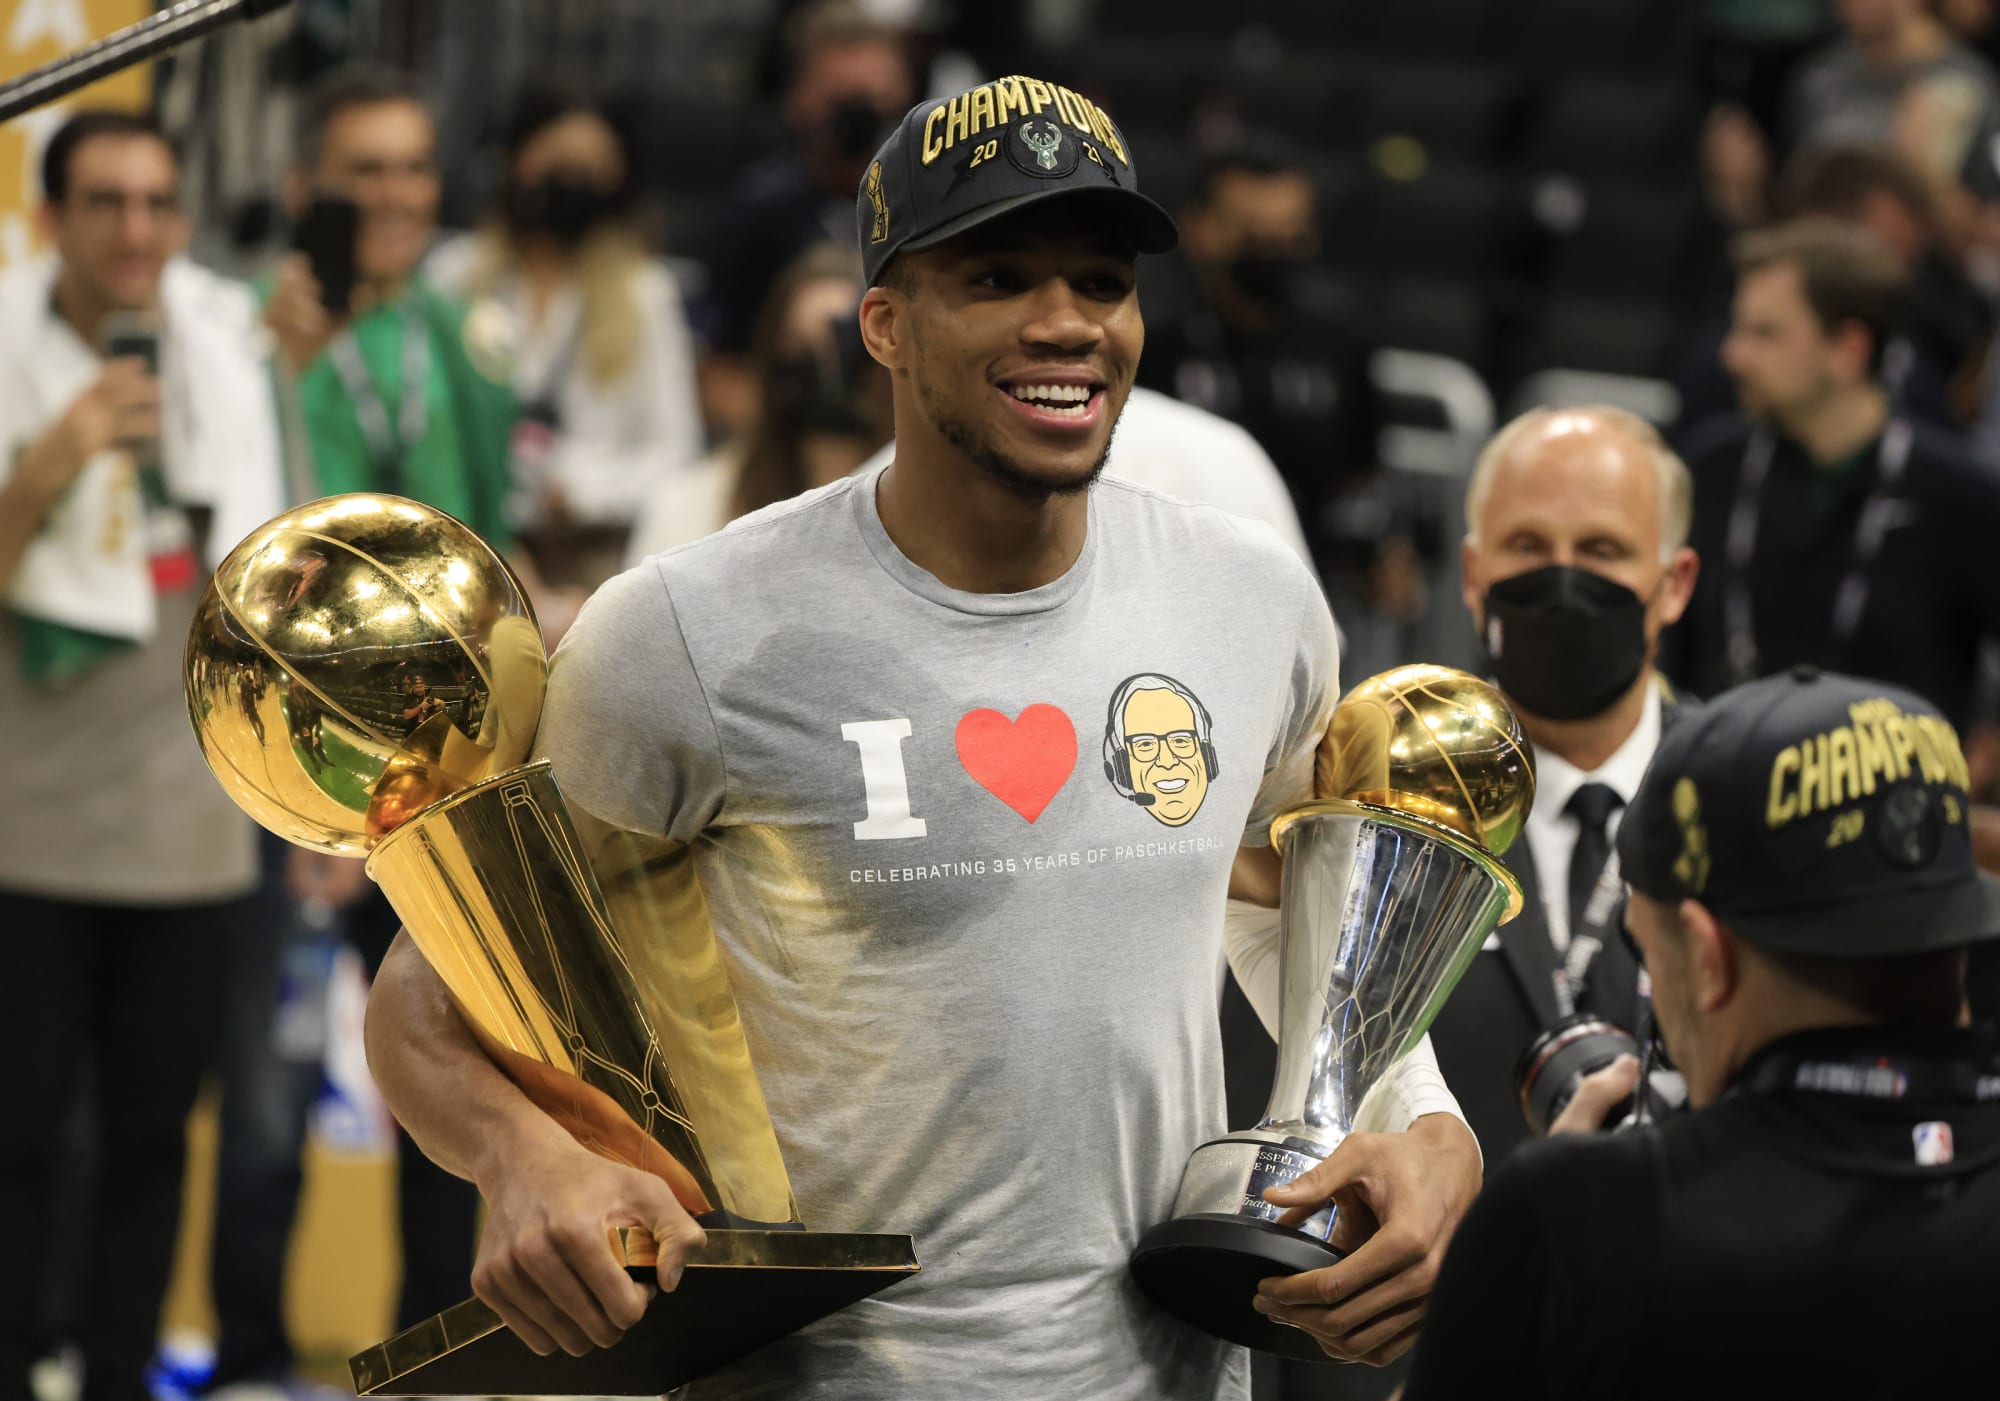 Giannis Antetokounmpo, NBA Champion, was unstoppable in the Finals.